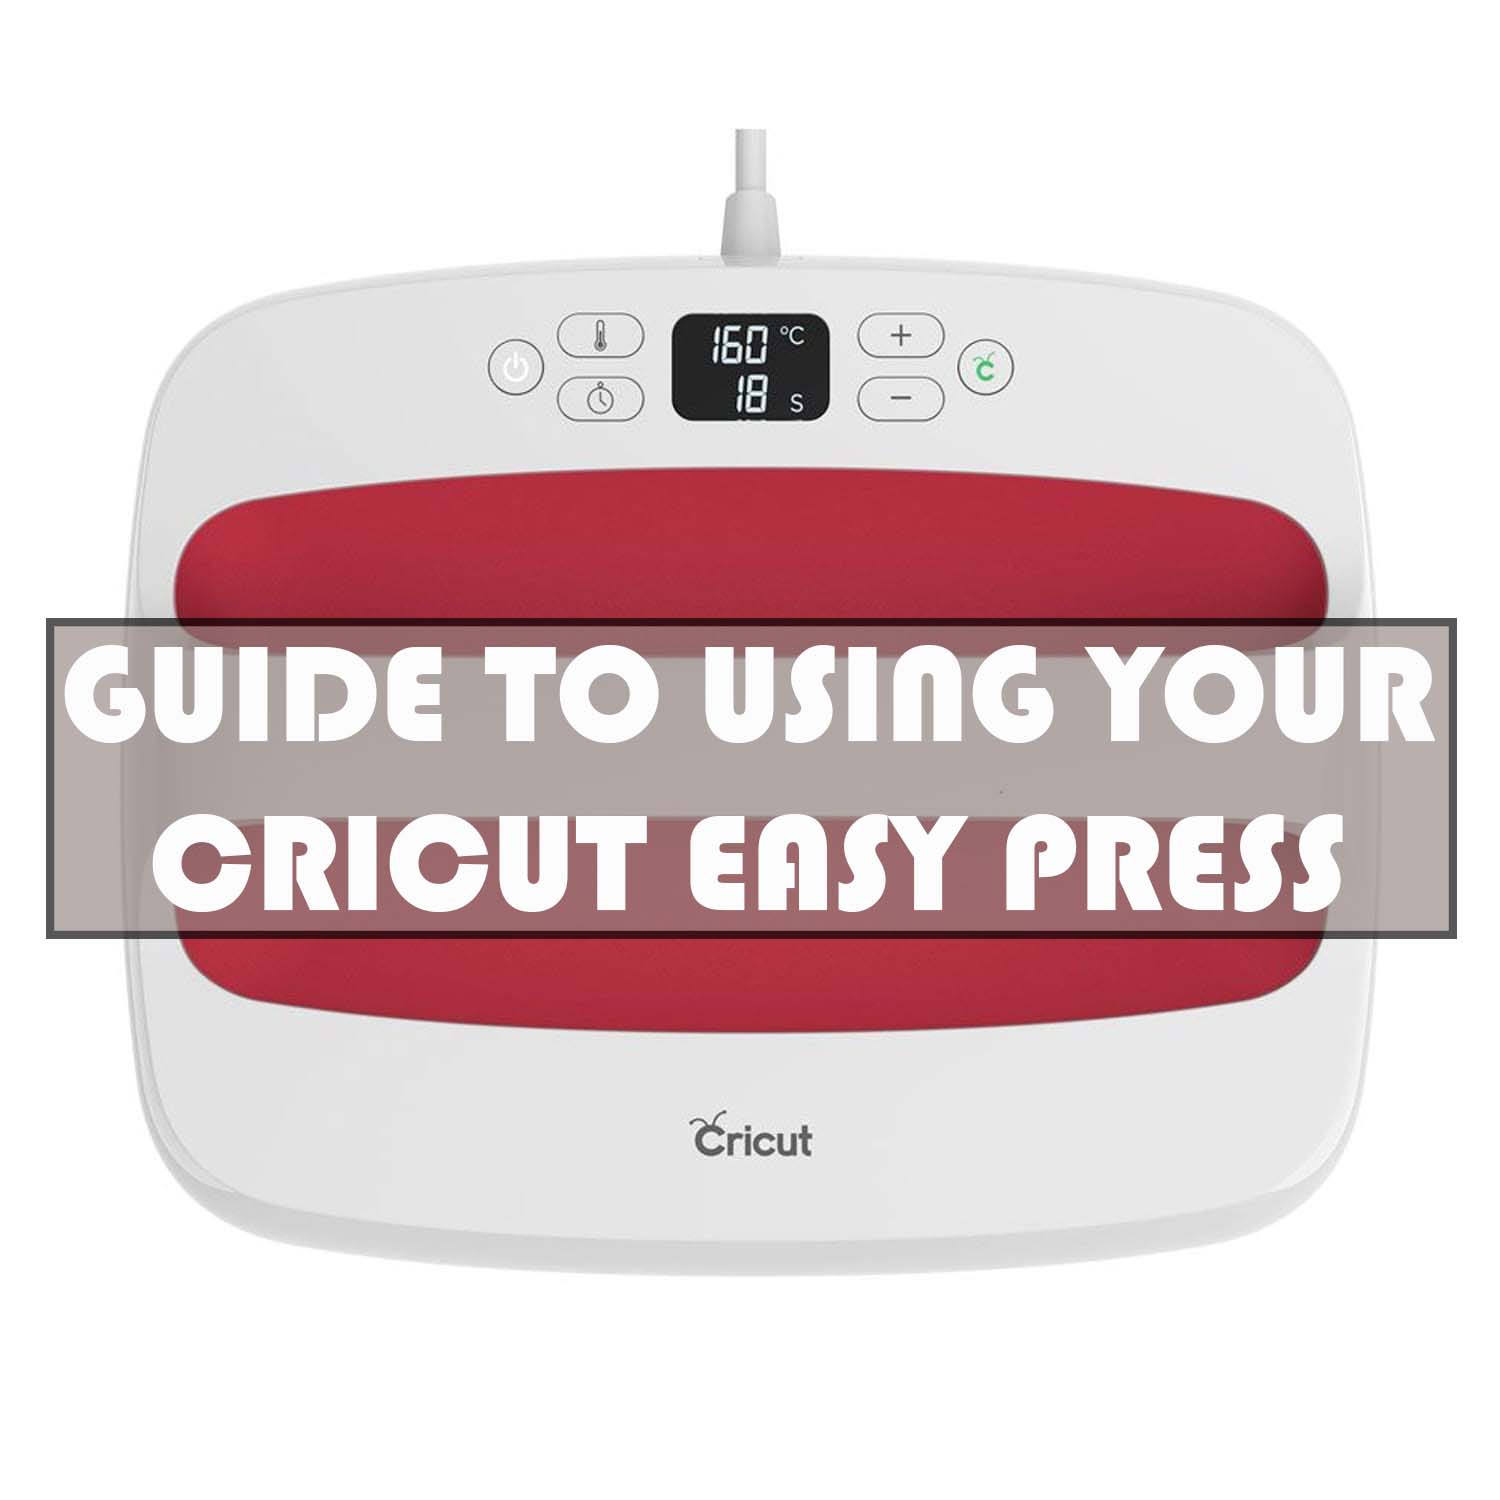 Best practice' guide to using the Cricut Easypress - GM Crafts